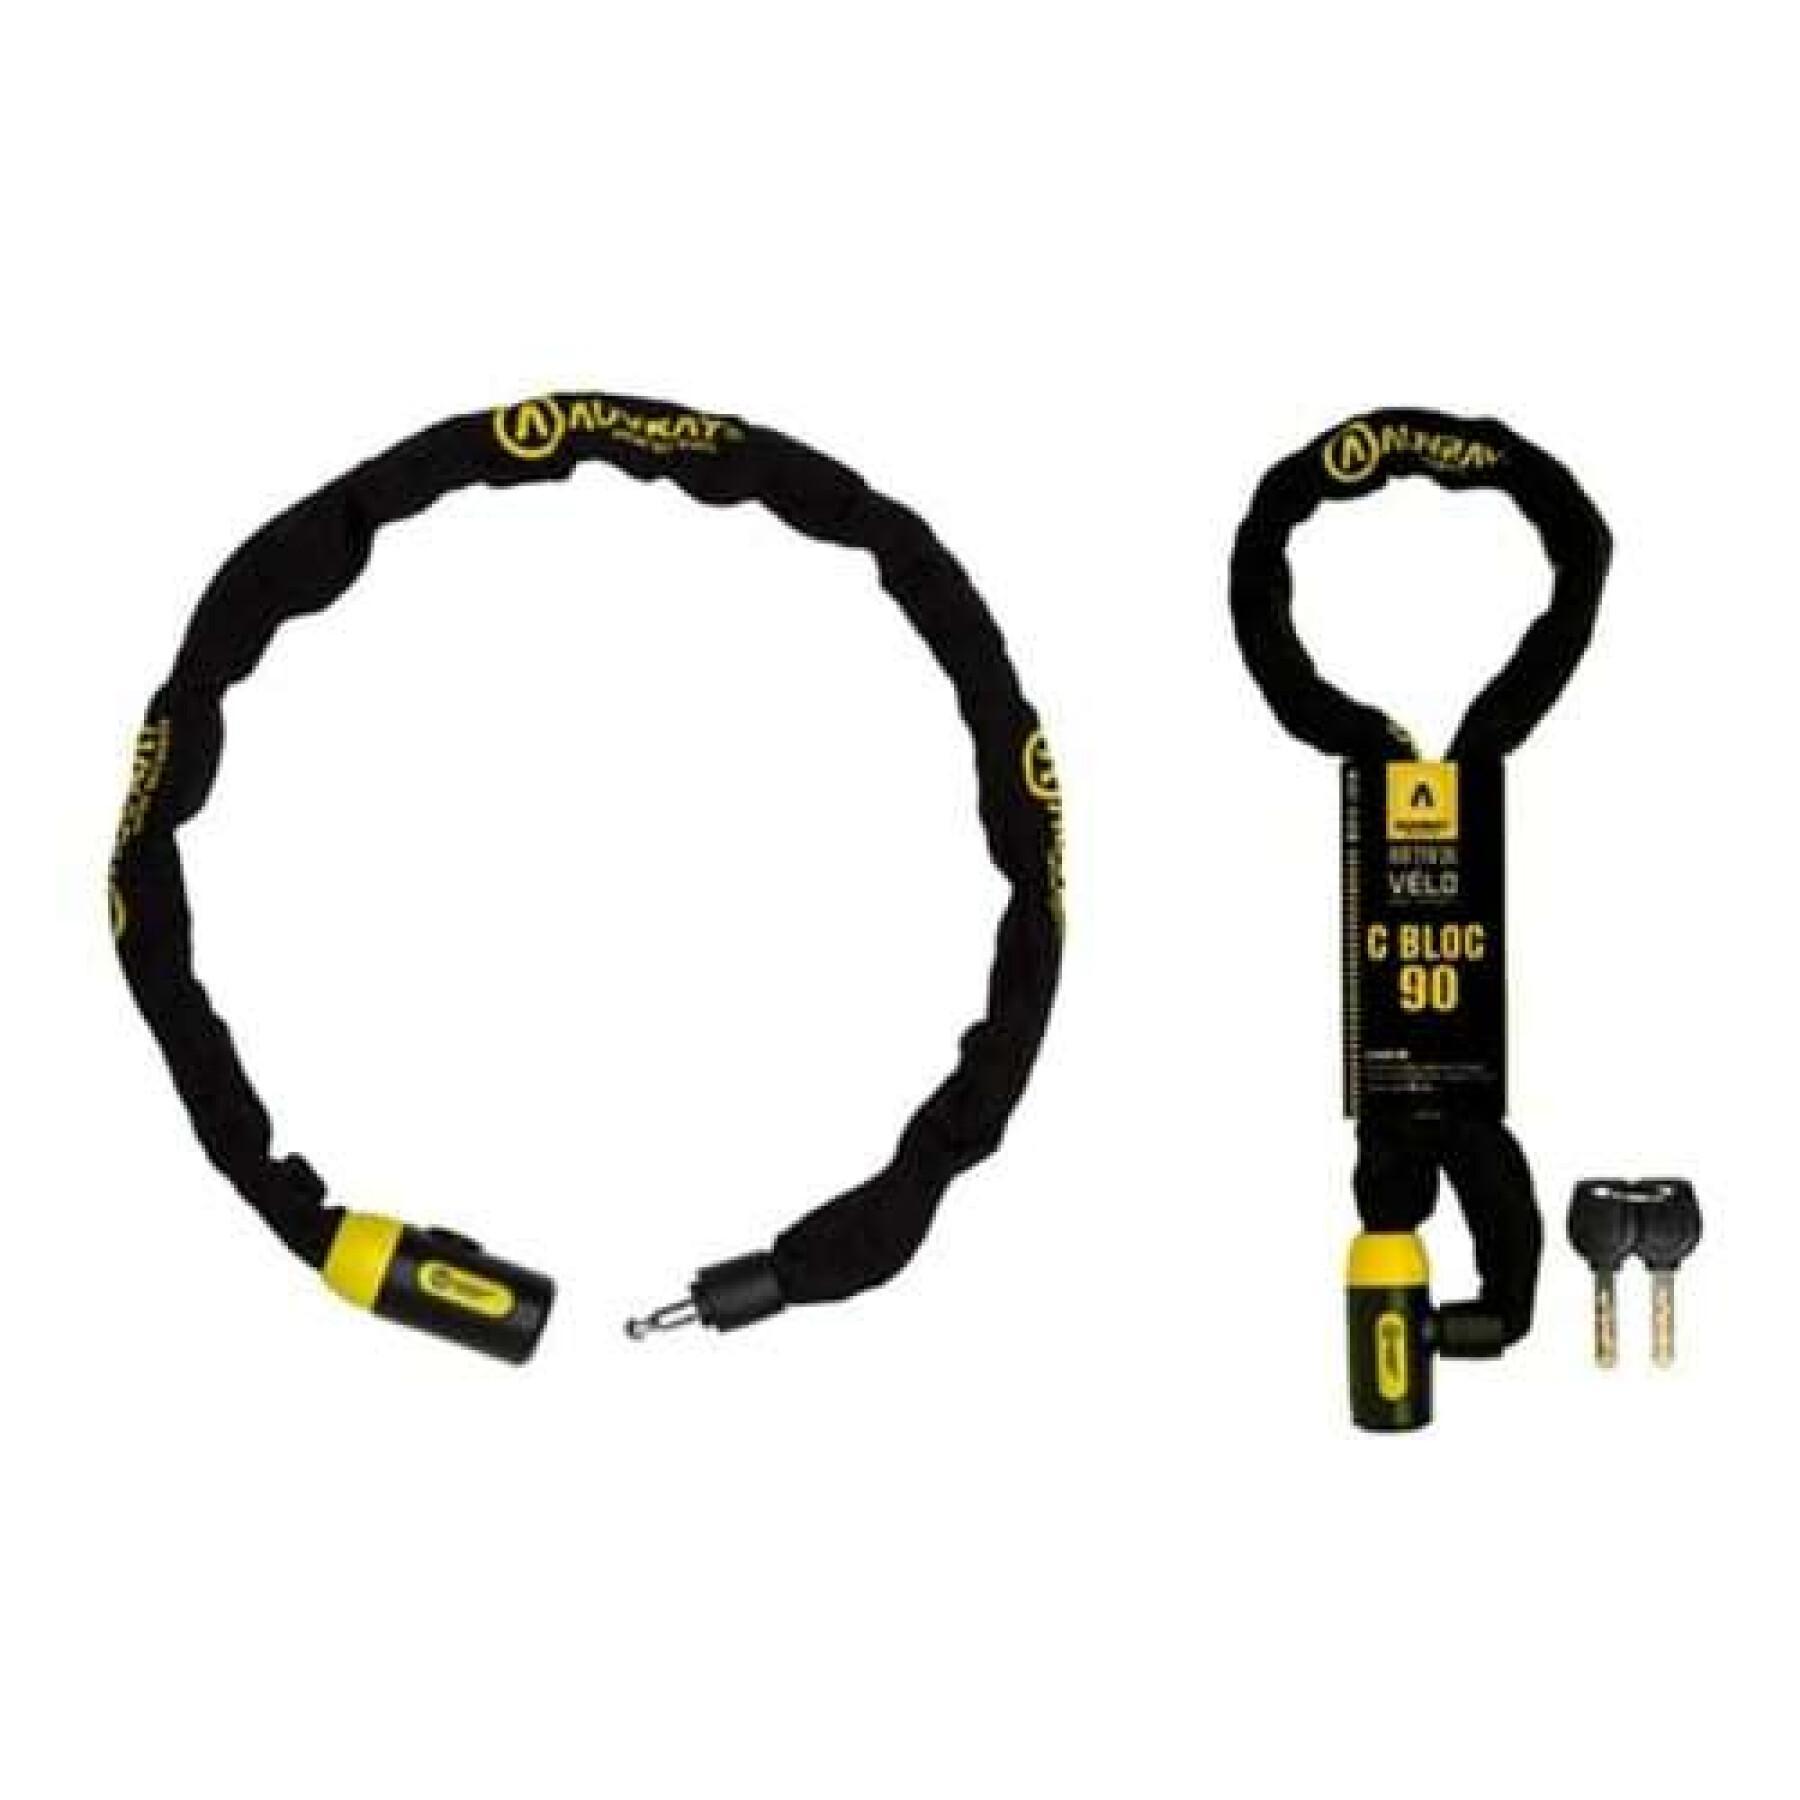 Bike chain lock with key for rental companies with integrated lock security level 6-10 Auvray C-Bloc